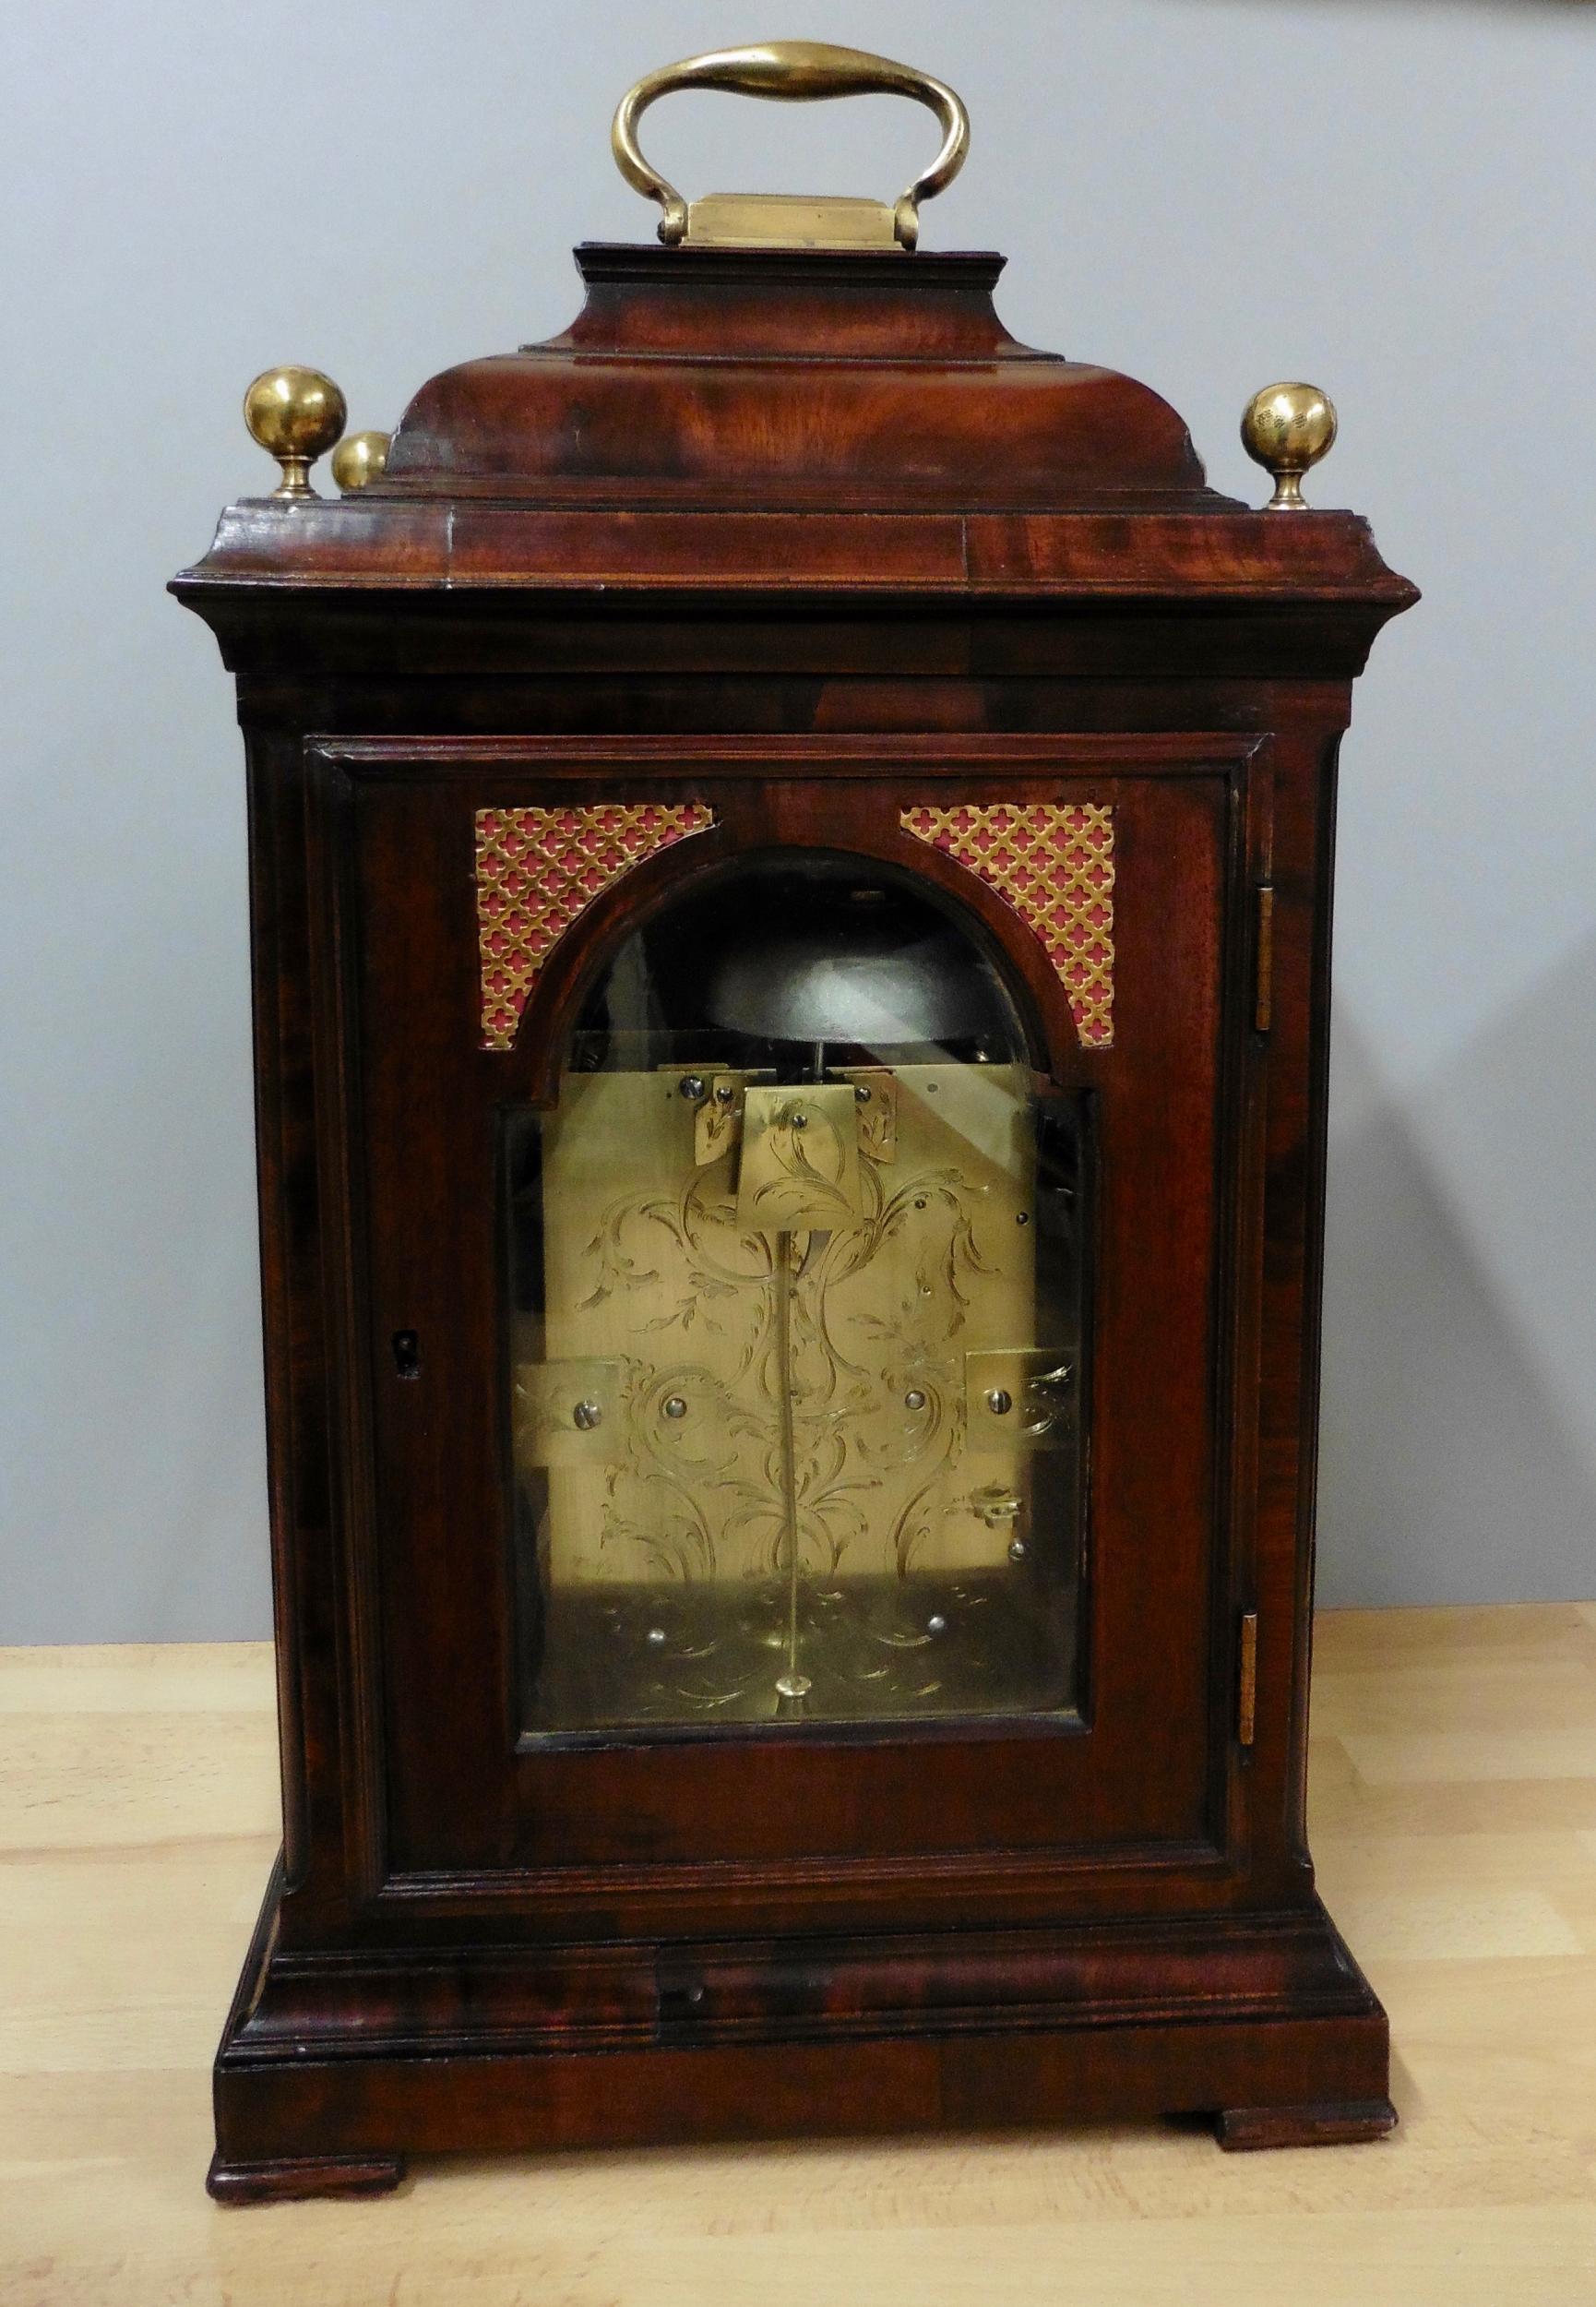 Mid-18th Century George III Mahogany Bell Top Bracket Clock With Verge Escapement by H.Thomas For Sale